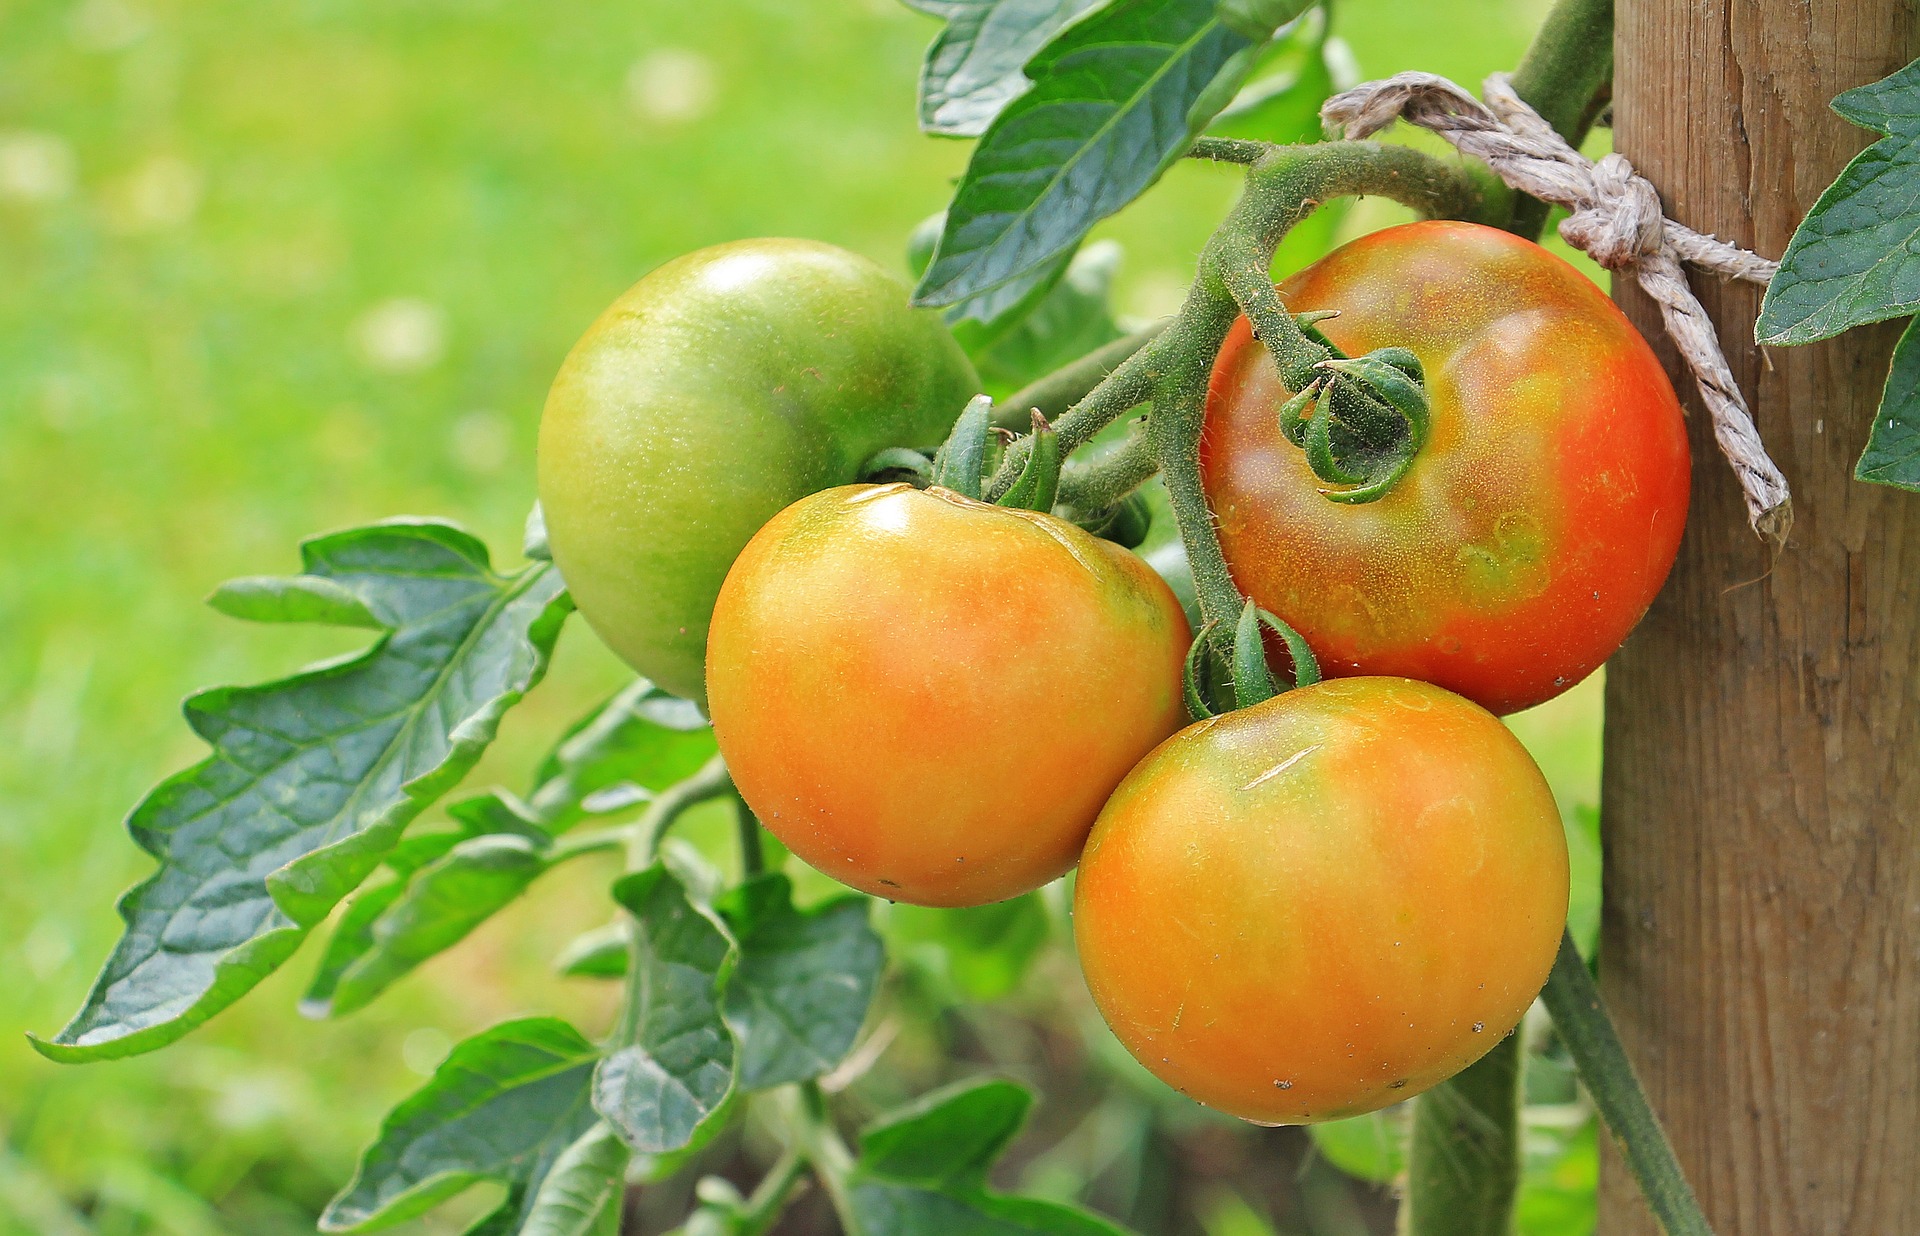 How To Ripen Your Tomatoes